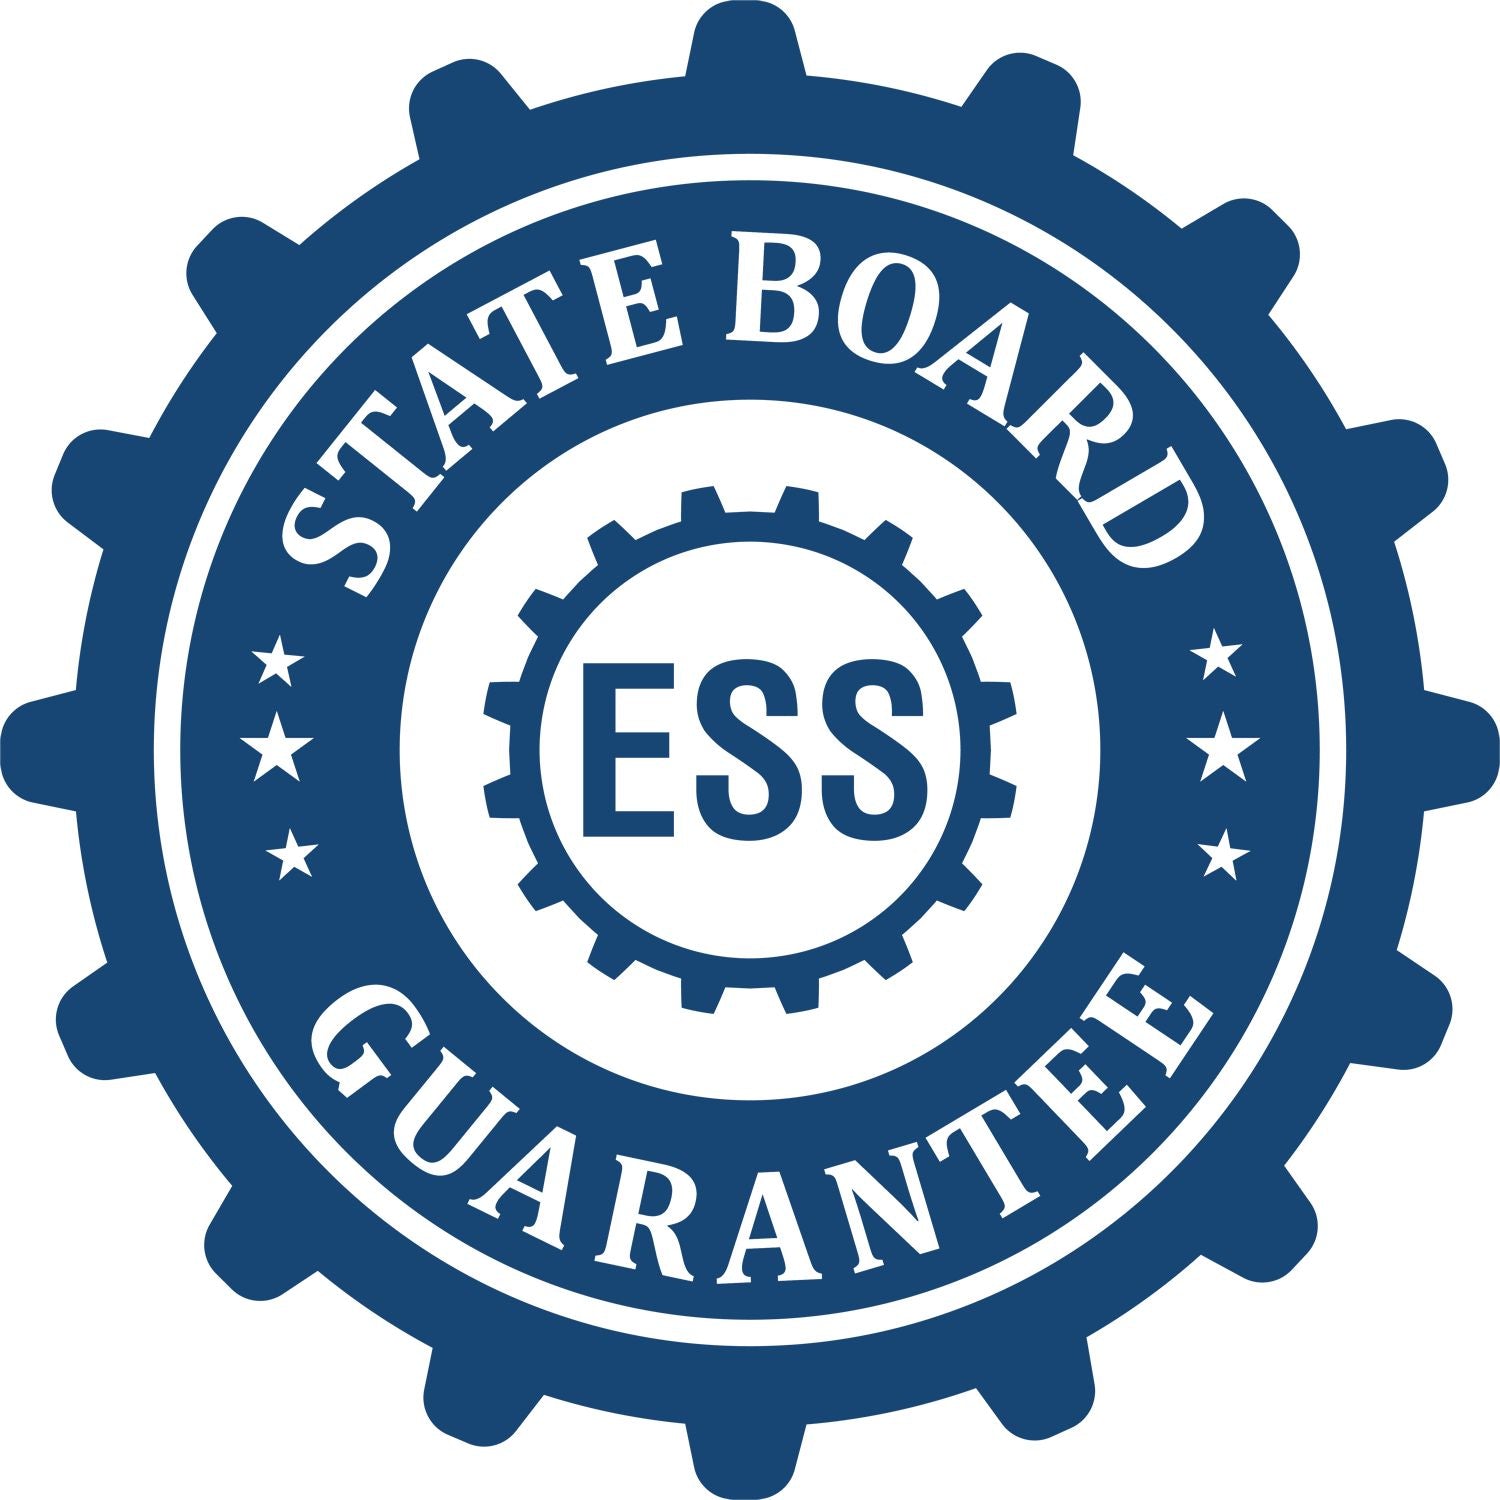 An emblem in a gear shape illustrating a state board guarantee for the Kentucky Long Reach Landscape Architect Embossing Stamp product.